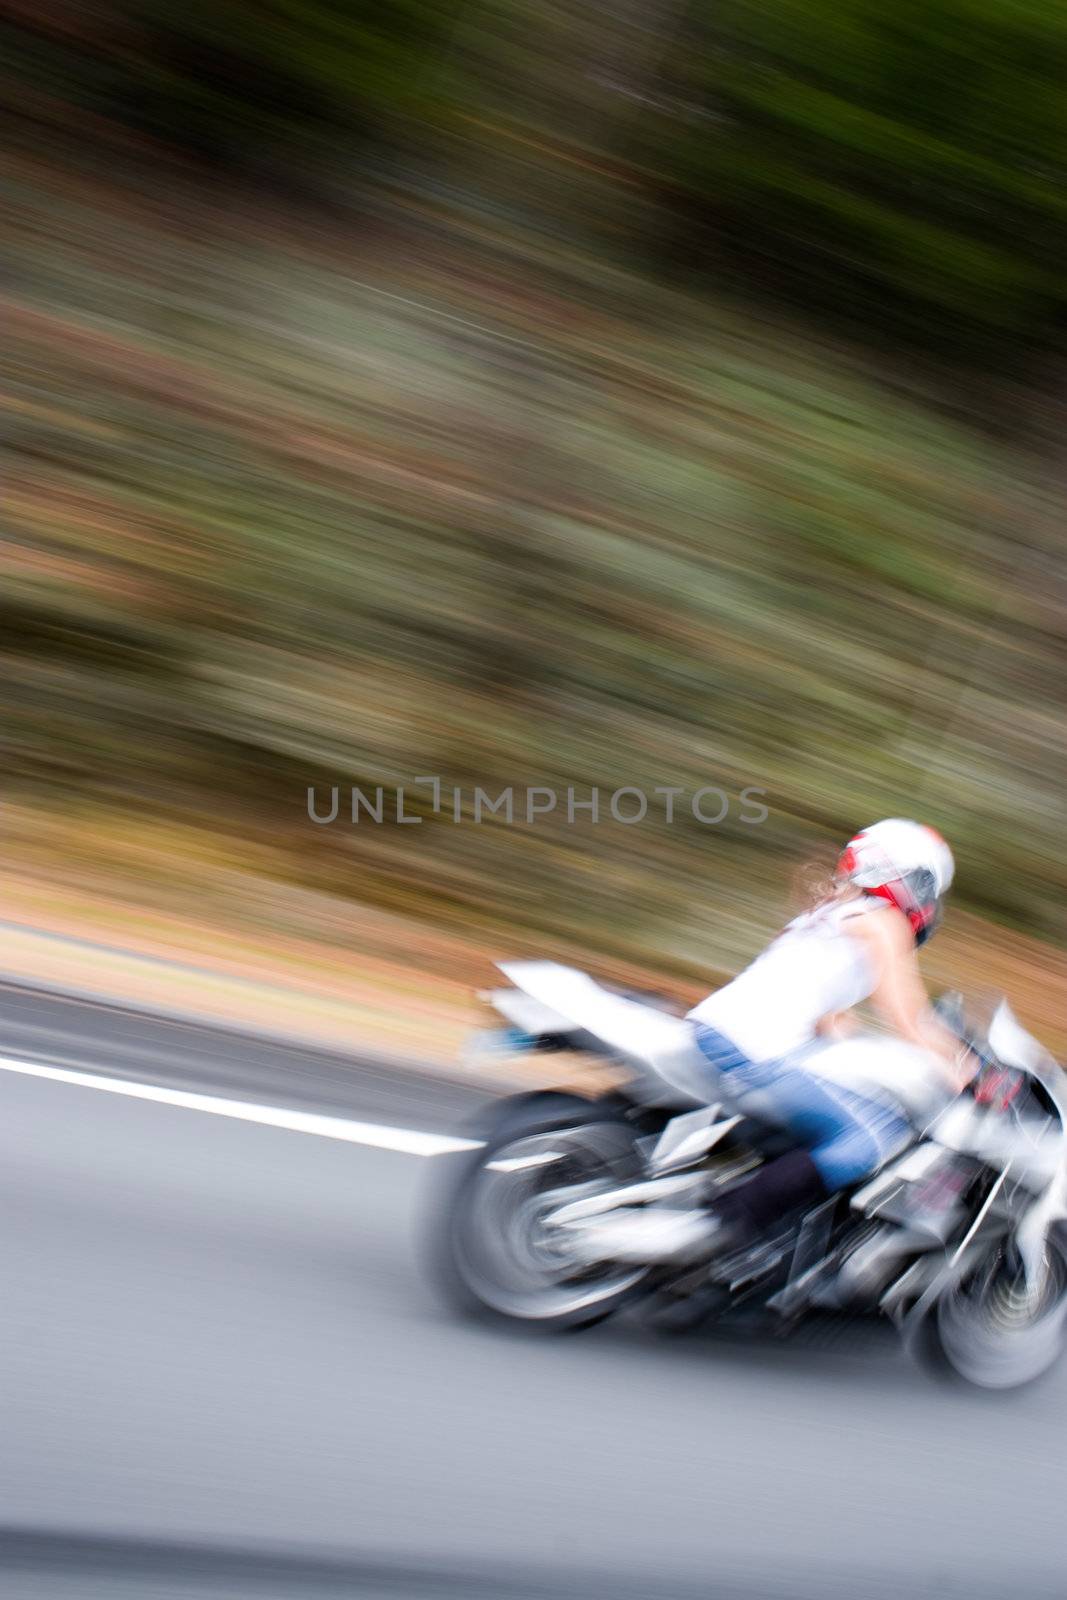 Abstract blur of a pretty girl driving a motorcycle at highway speeds.  Intentional motion blur.